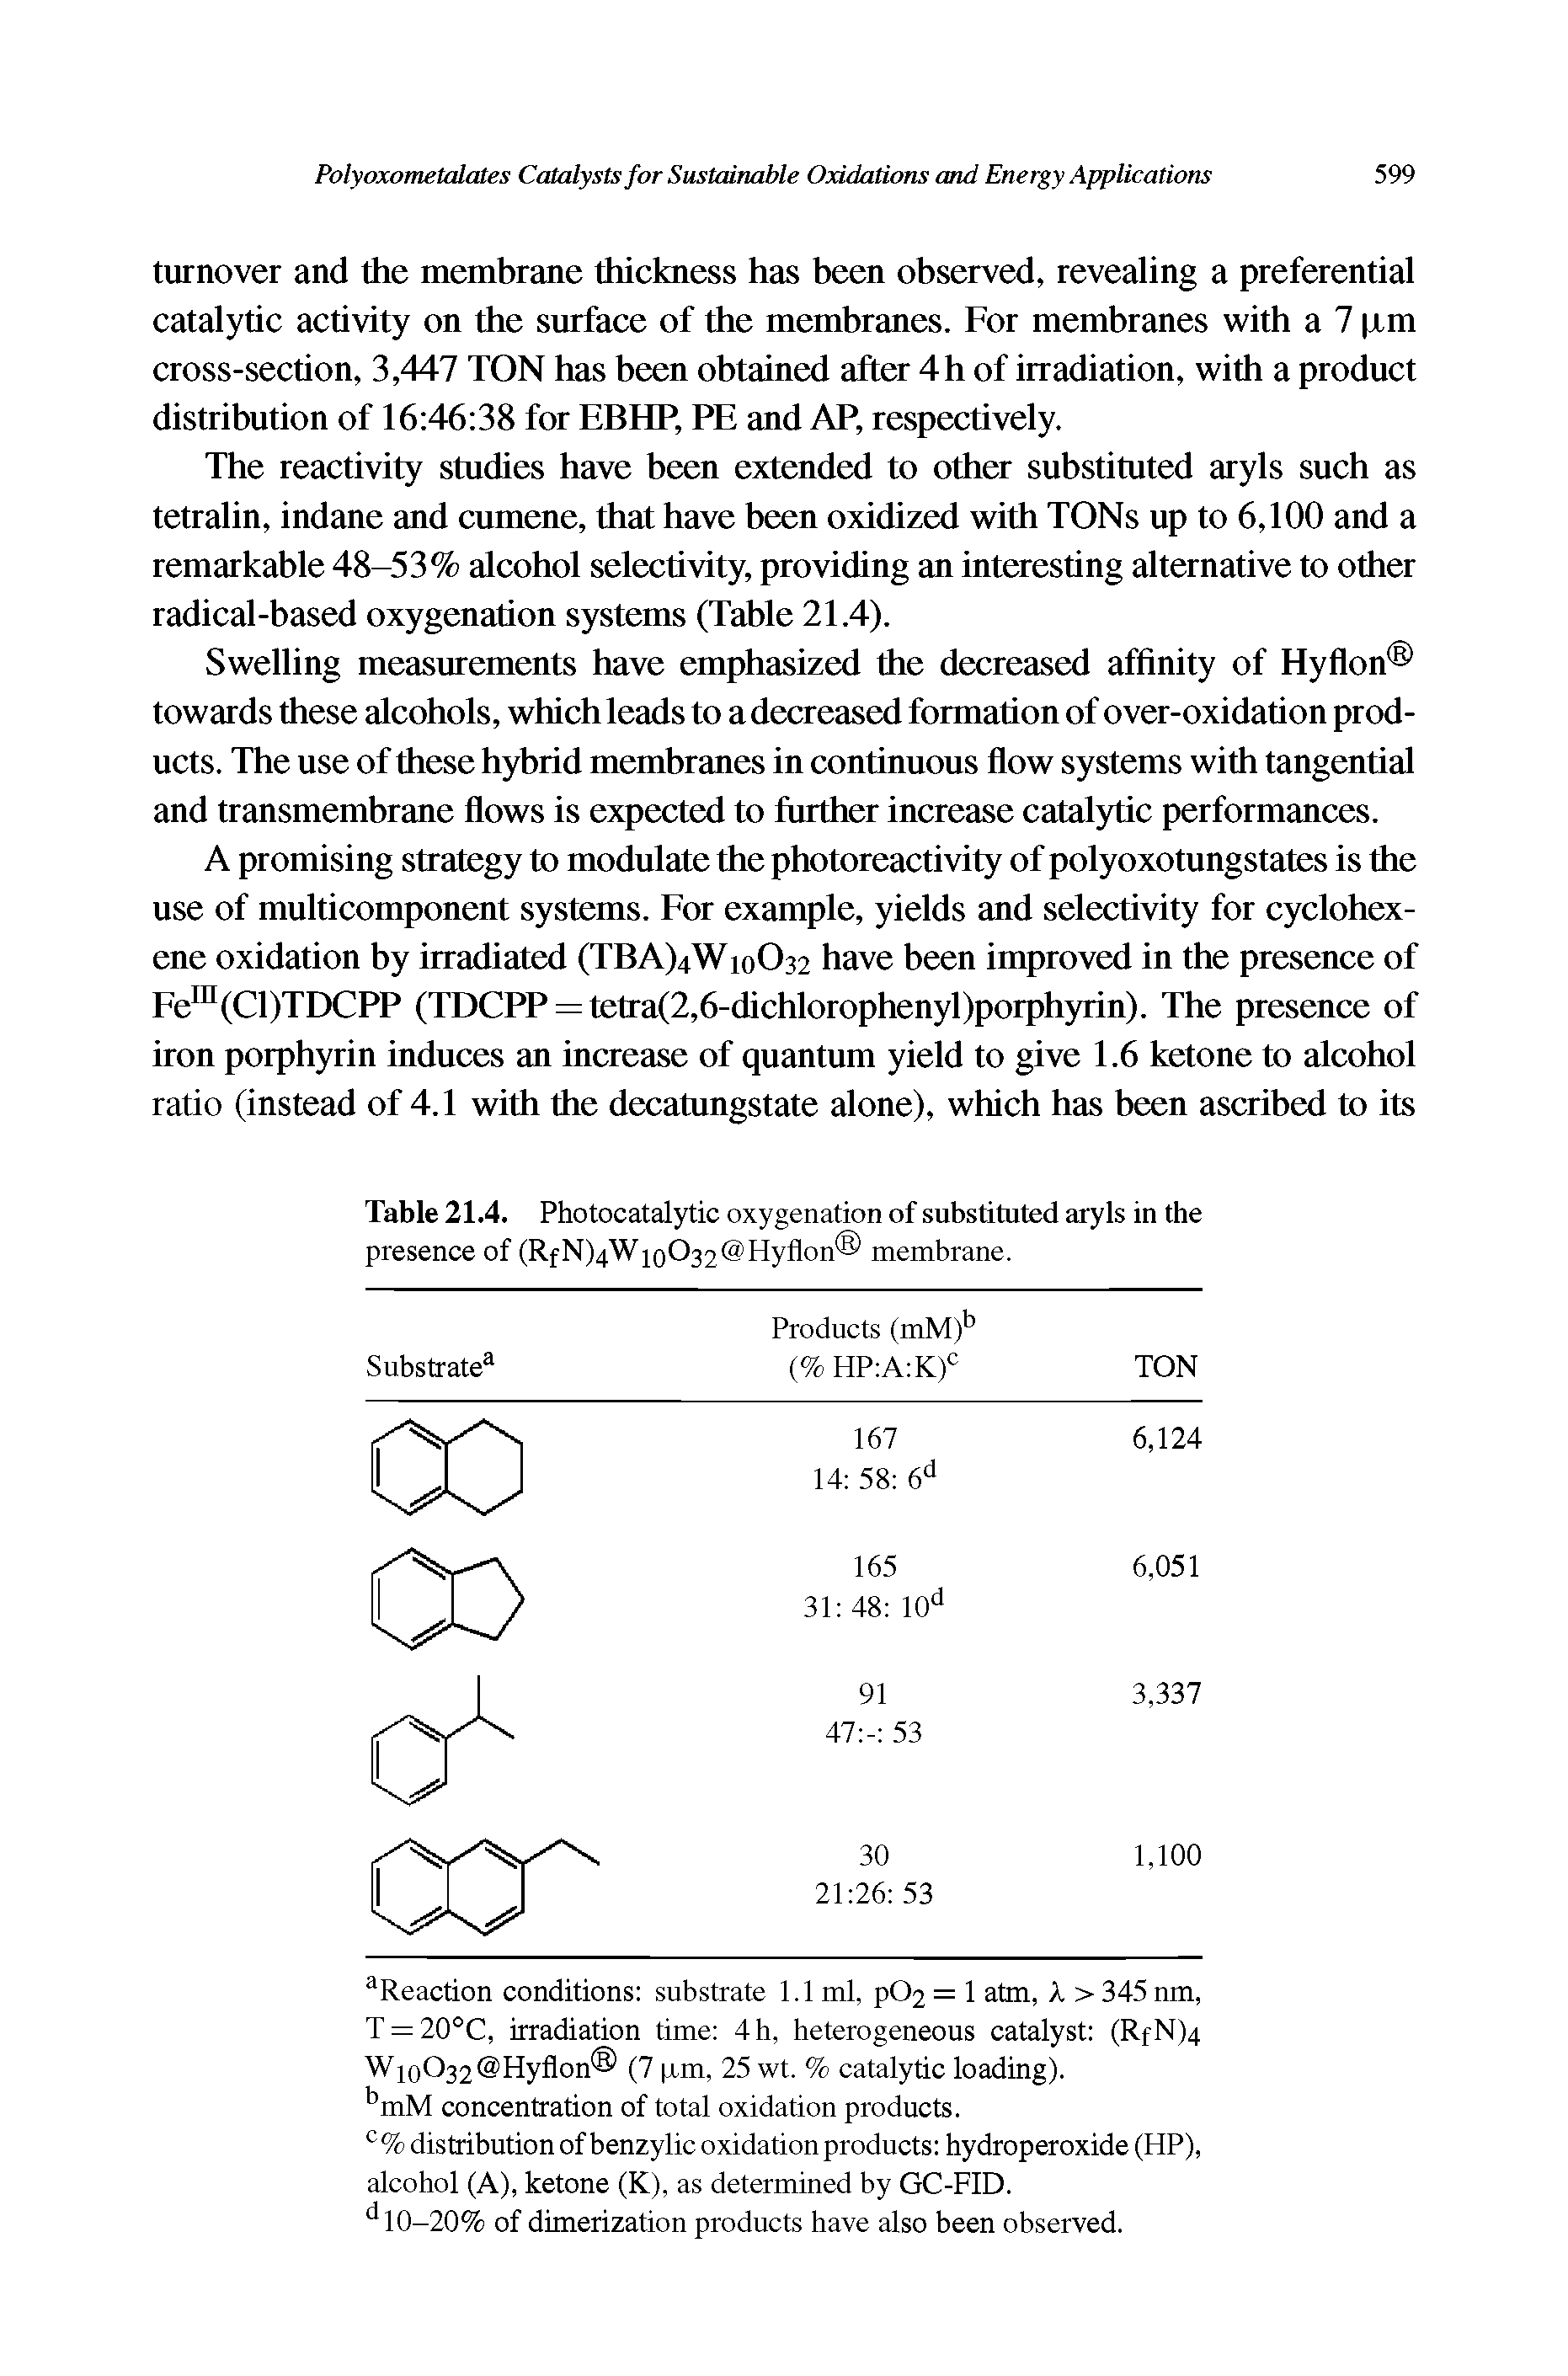 Table 21.4. Photocatalytic oxygenation of substituted aryls in the presence of (RfN)4Wio032 Hyflon membrane.